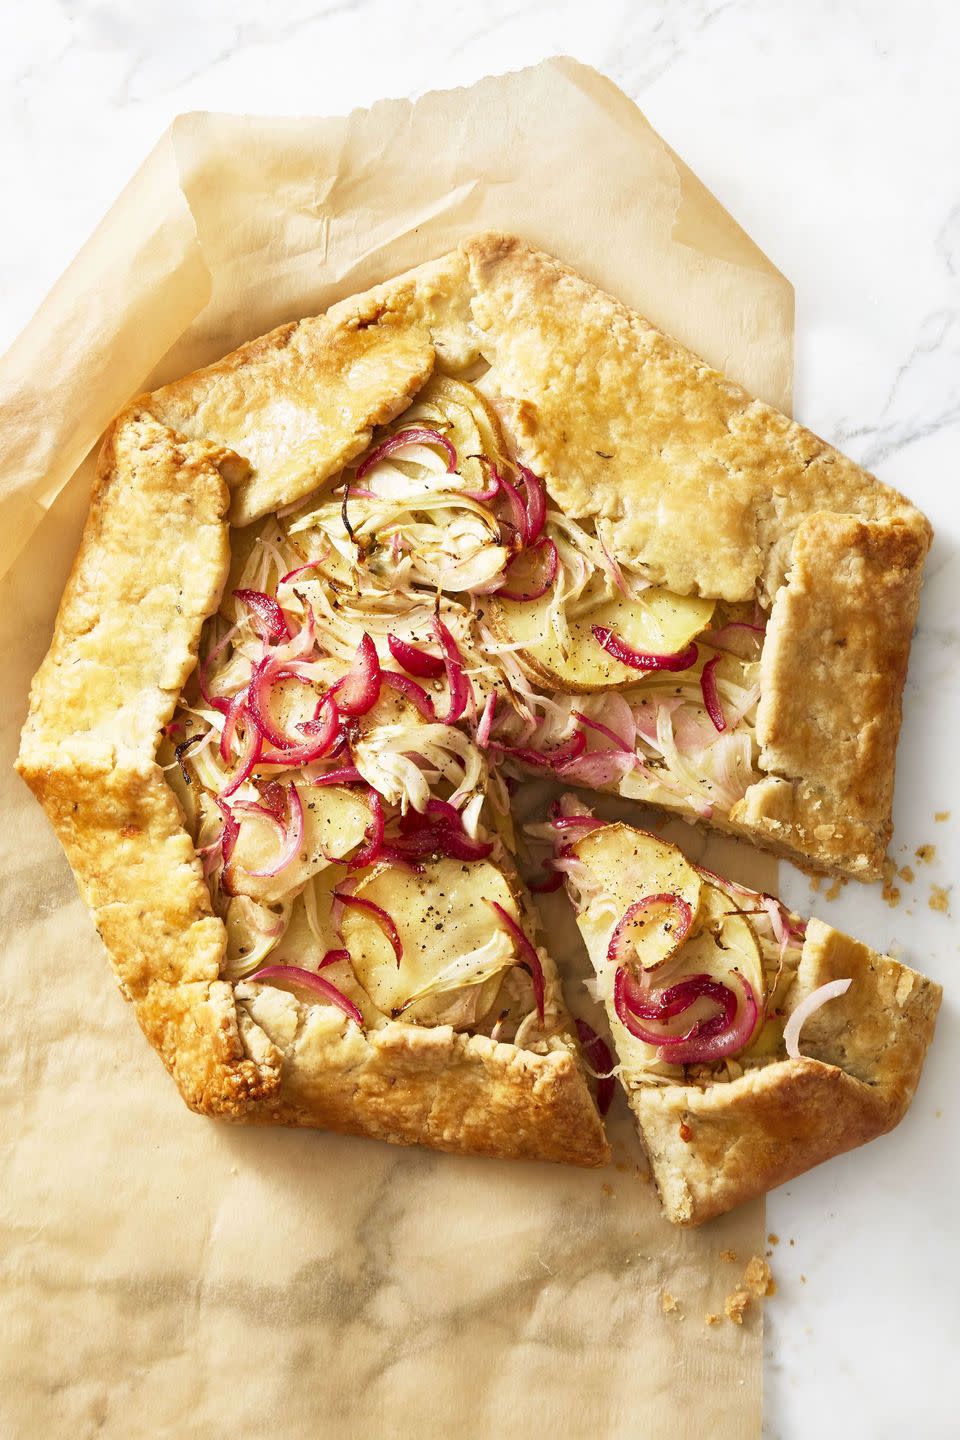 <p>This cheesy, golden galette will warm you right up.</p><p>Get the<strong> <a href="https://www.goodhousekeeping.com/food-recipes/a46637/rustic-potato-and-fennel-galette/" rel="nofollow noopener" target="_blank" data-ylk="slk:Rustic Potato and Fennel Galette recipe" class="link ">Rustic Potato and Fennel Galette recipe</a></strong>.</p>